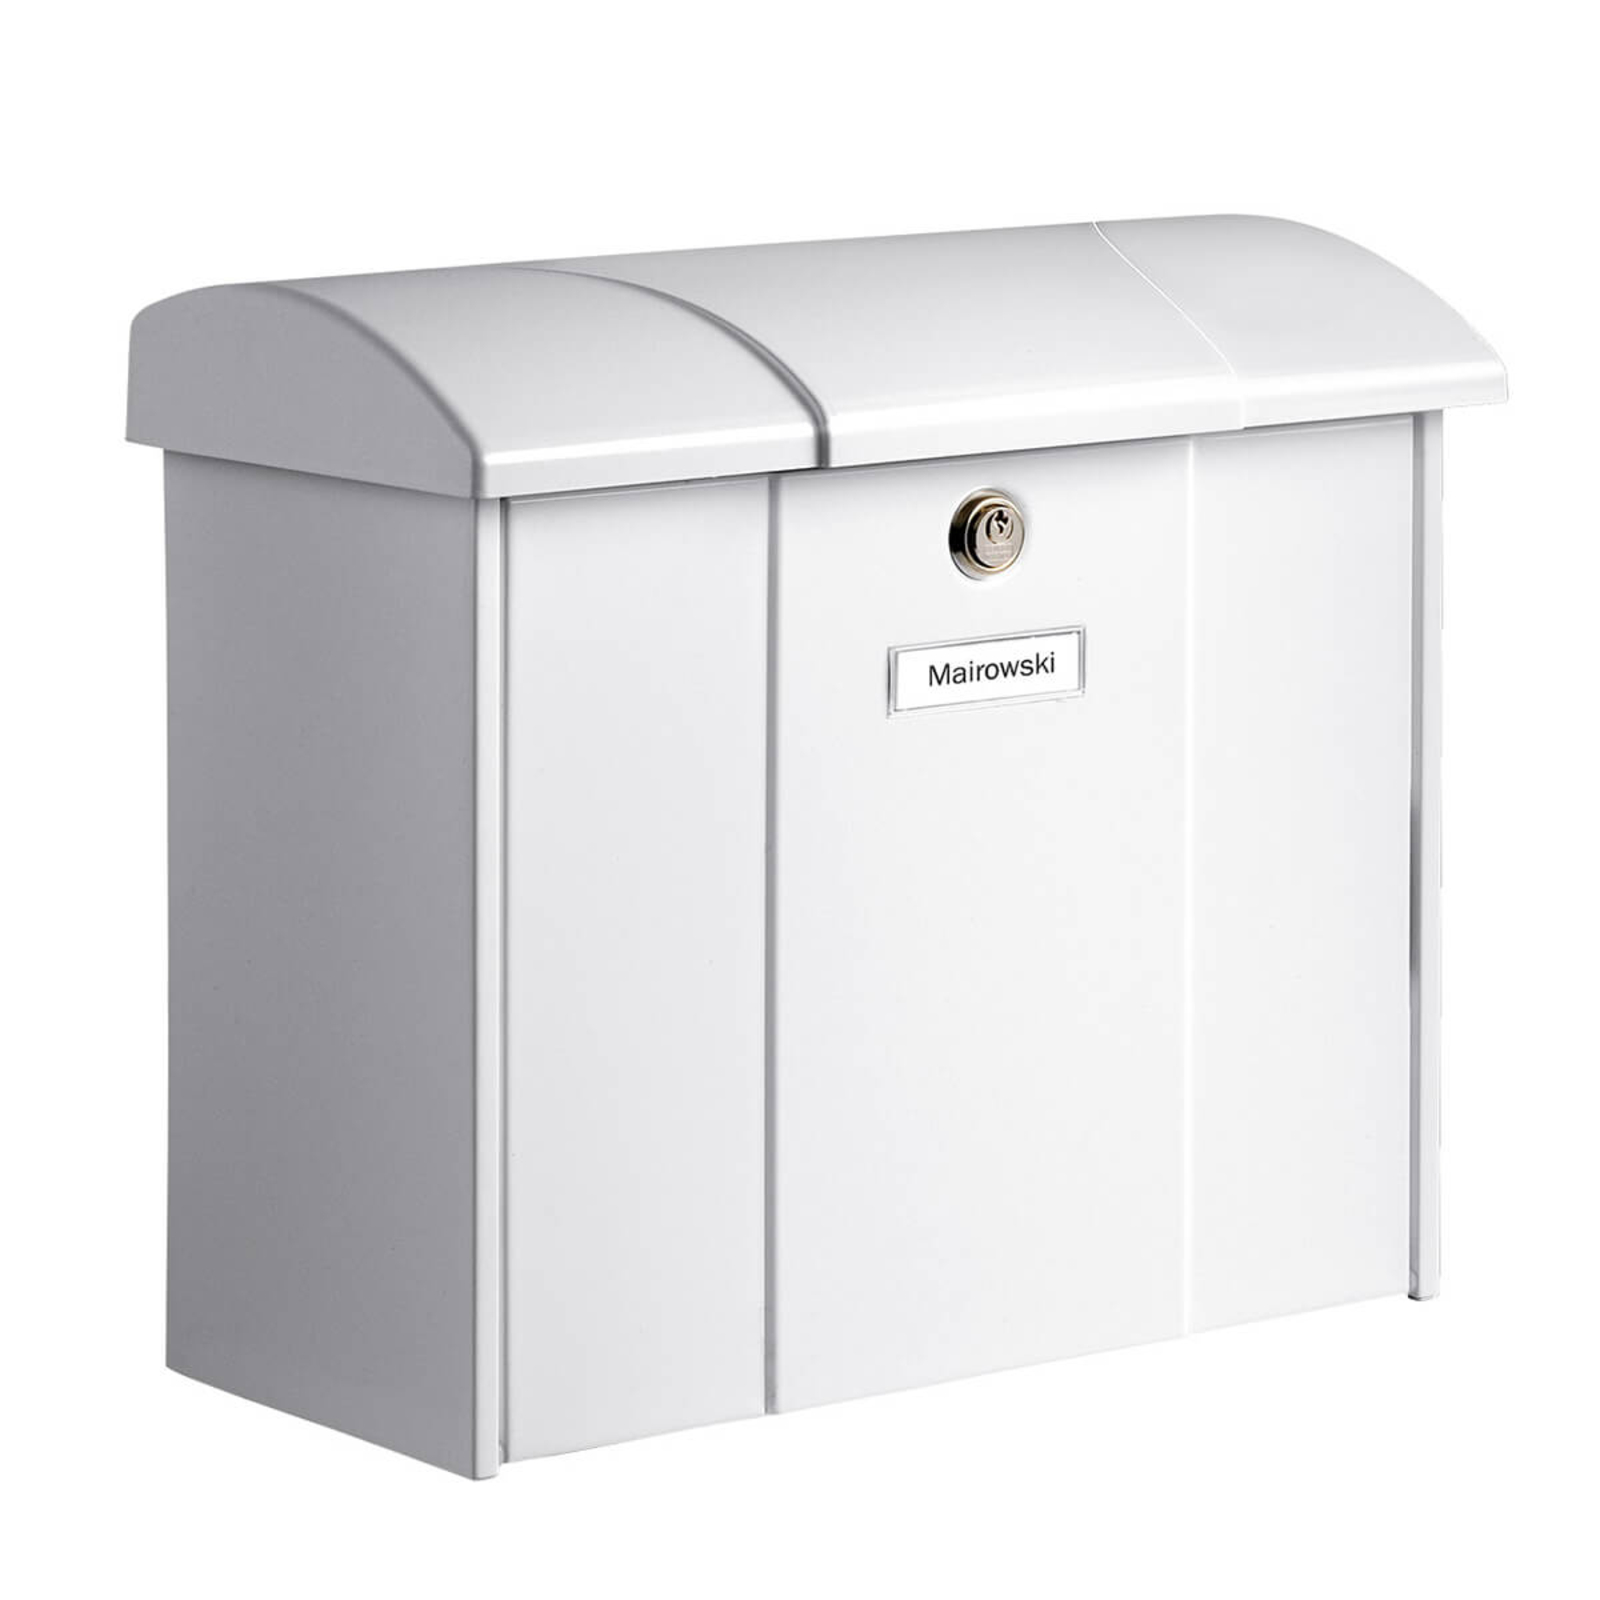 Olymp letterbox in white